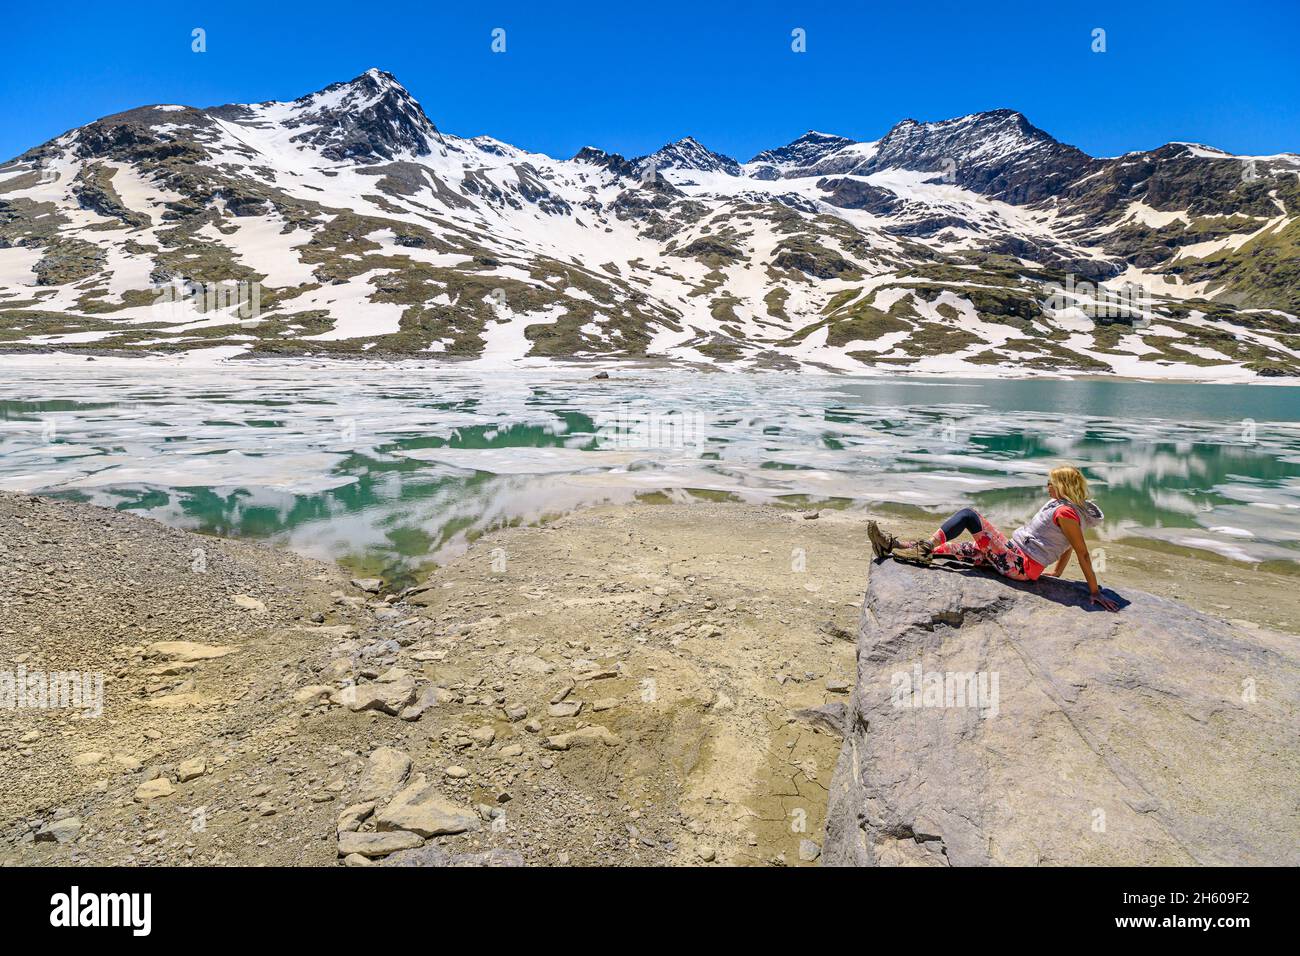 Woman in the snow relaxes sitting by reflecting White lake or Lago Bianco of Switzerland. Lakefront on iced White lake in Grisons Canton at the Stock Photo